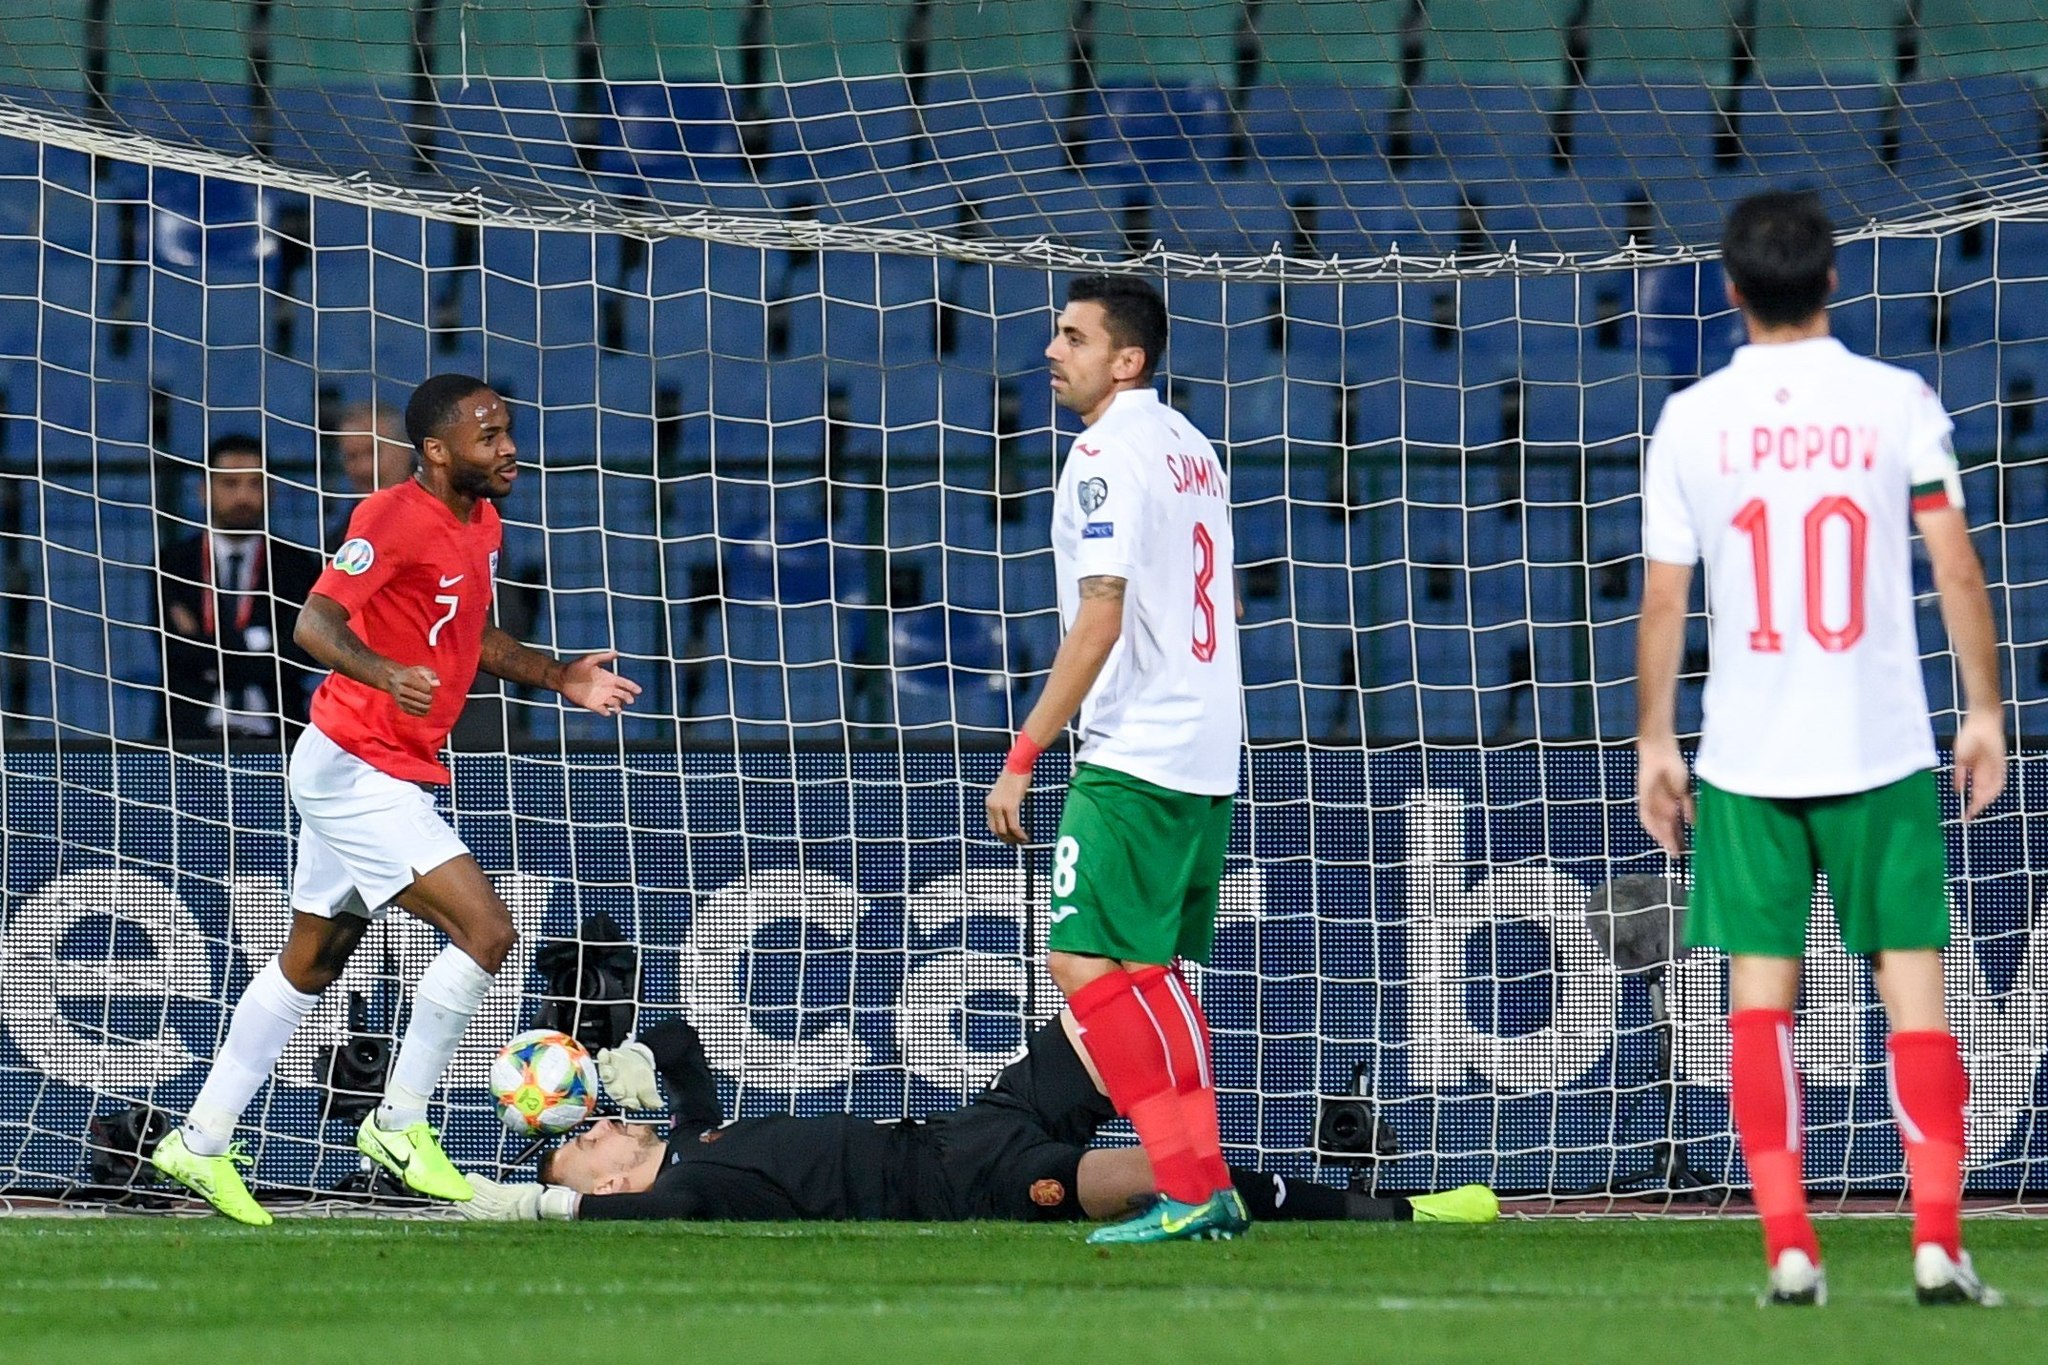 Sofia (Bulgaria), 14/10/2019.- Raheem Sterling of <HIT>England</HIT> (L) celebrates after scoring during the UEFA EURO 2020 qualifying group A soccer match between Bulgaria and <HIT>England</HIT> at Vassil Levski stadium in Sofia, Bulgaria, 14 October 2019. EFE/EPA/VASSIL DONEV